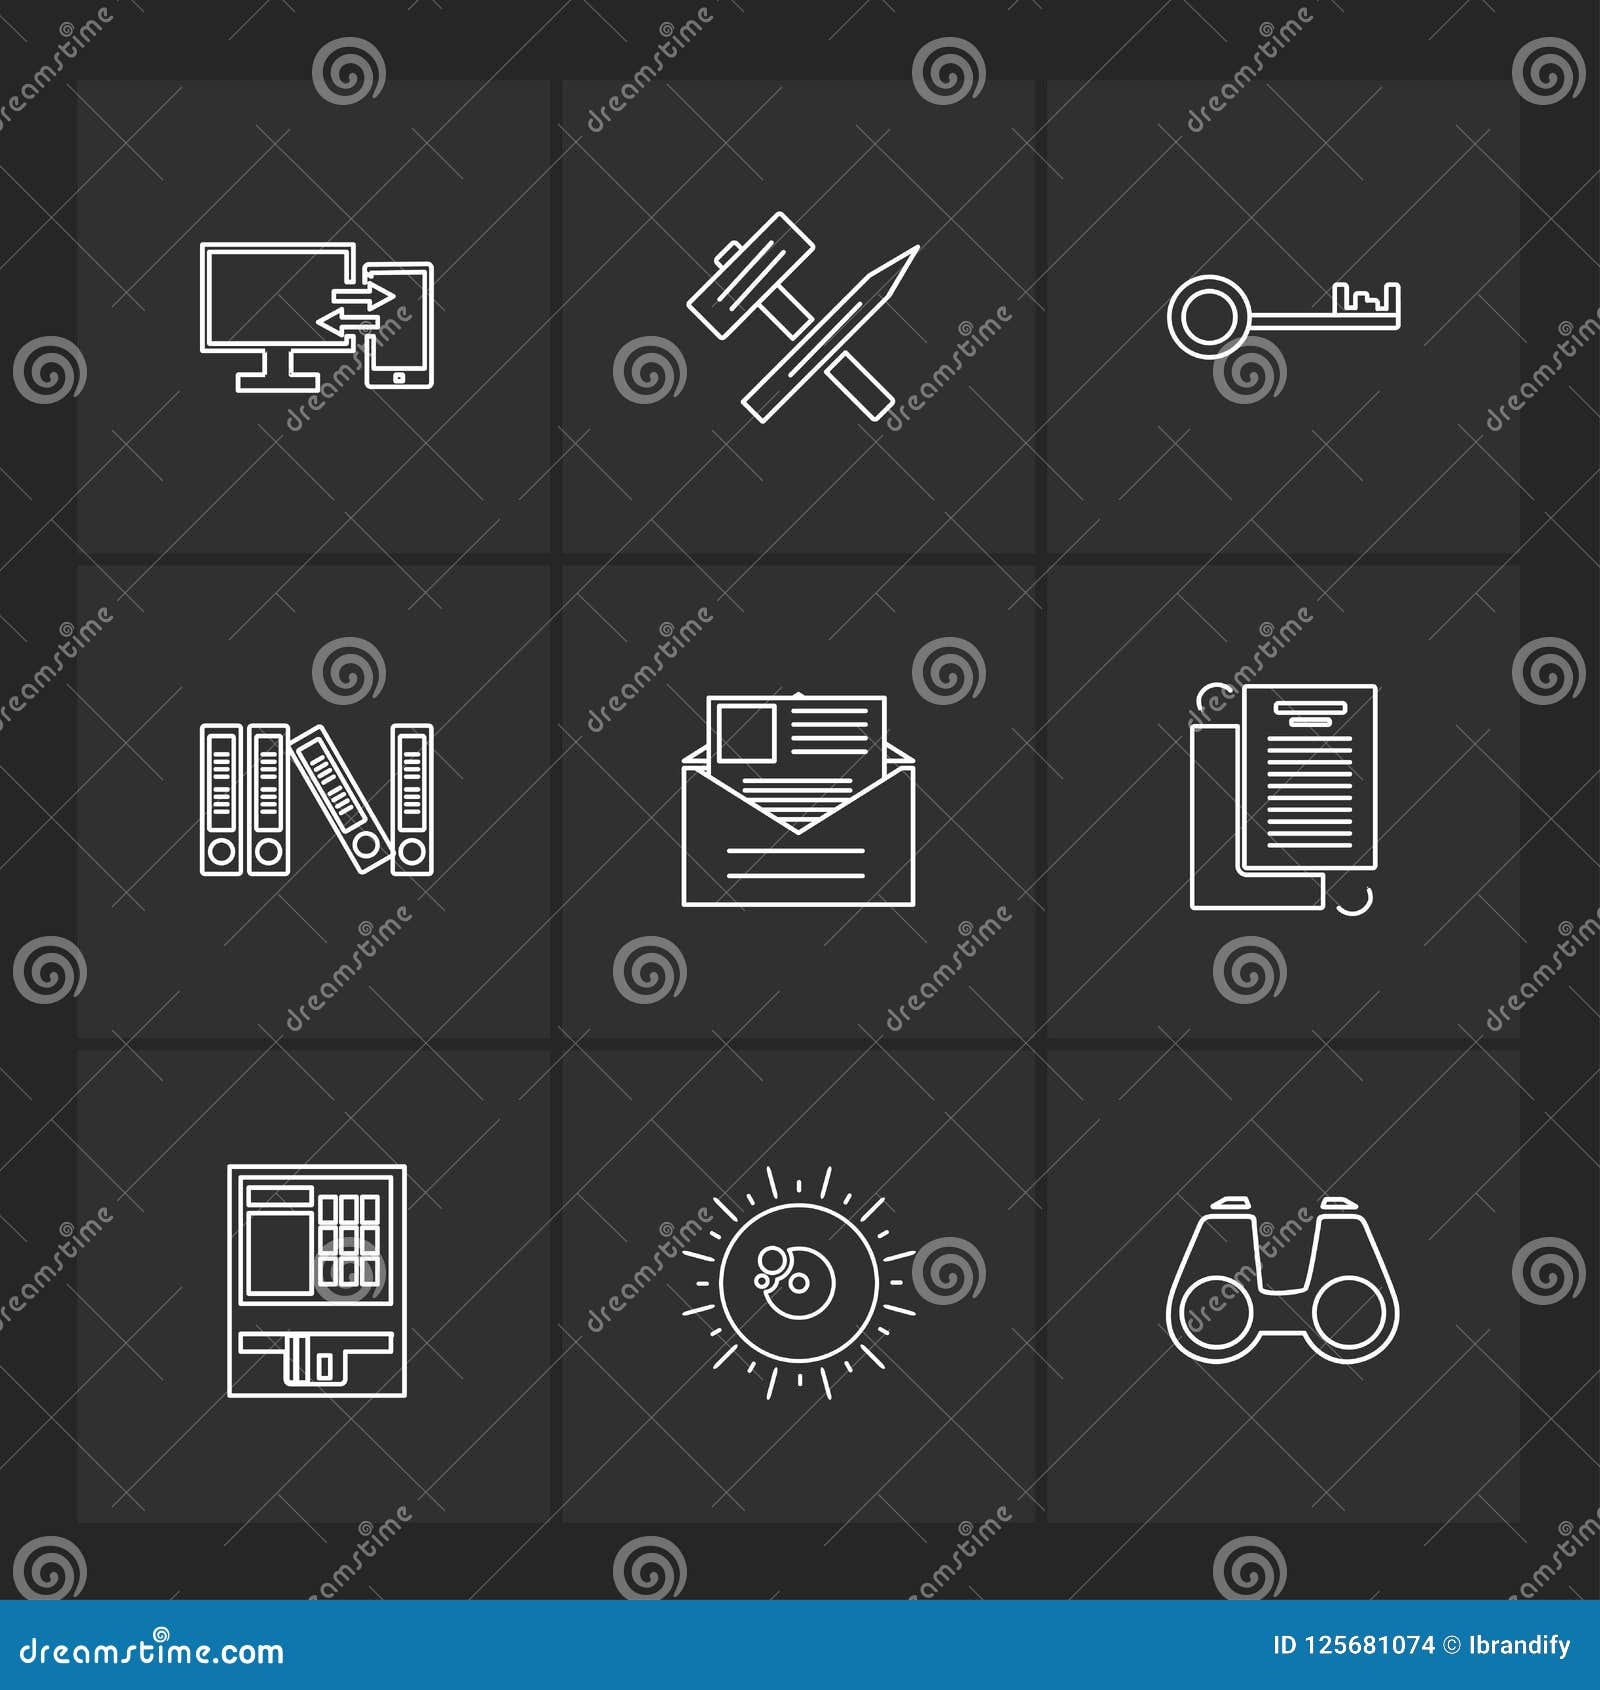 camcoder , camera , video , multimedia , computer , setting , eps icons set 